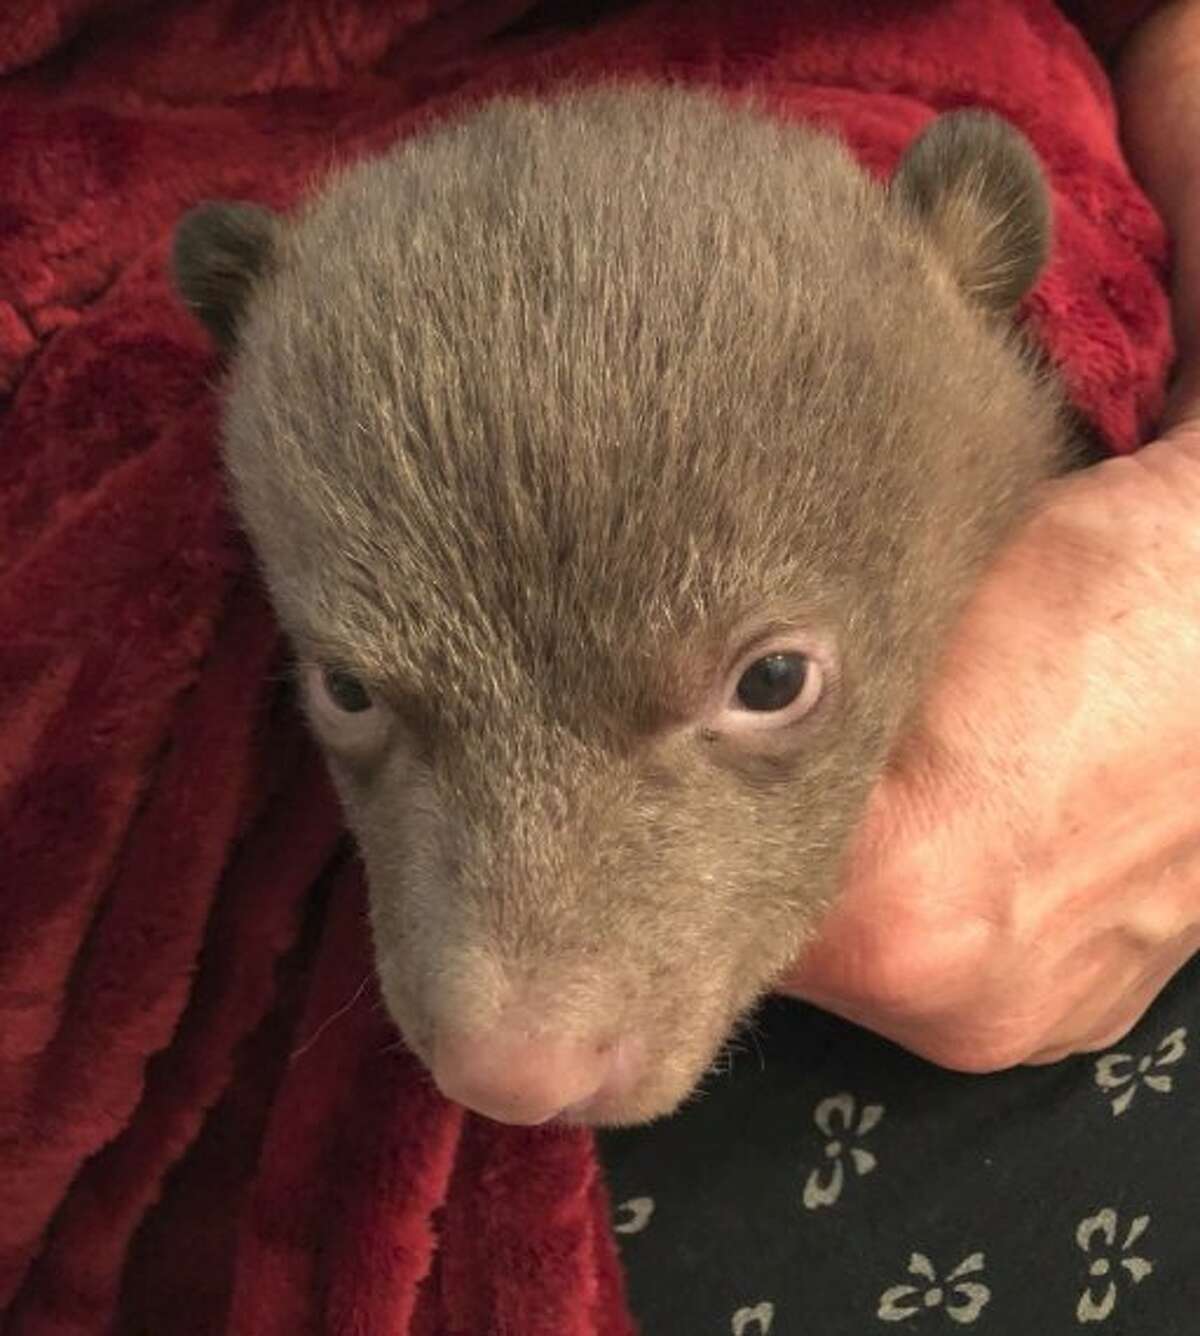 A rescued infant bear cub opens its eyes. Two infant bear cubs were found orphaned in national forest near Yreka in Siskiyou County, were transported by the Department of Fish and wildlife to Lake Tahoe Wildlife Care in South Lake Tahoe.